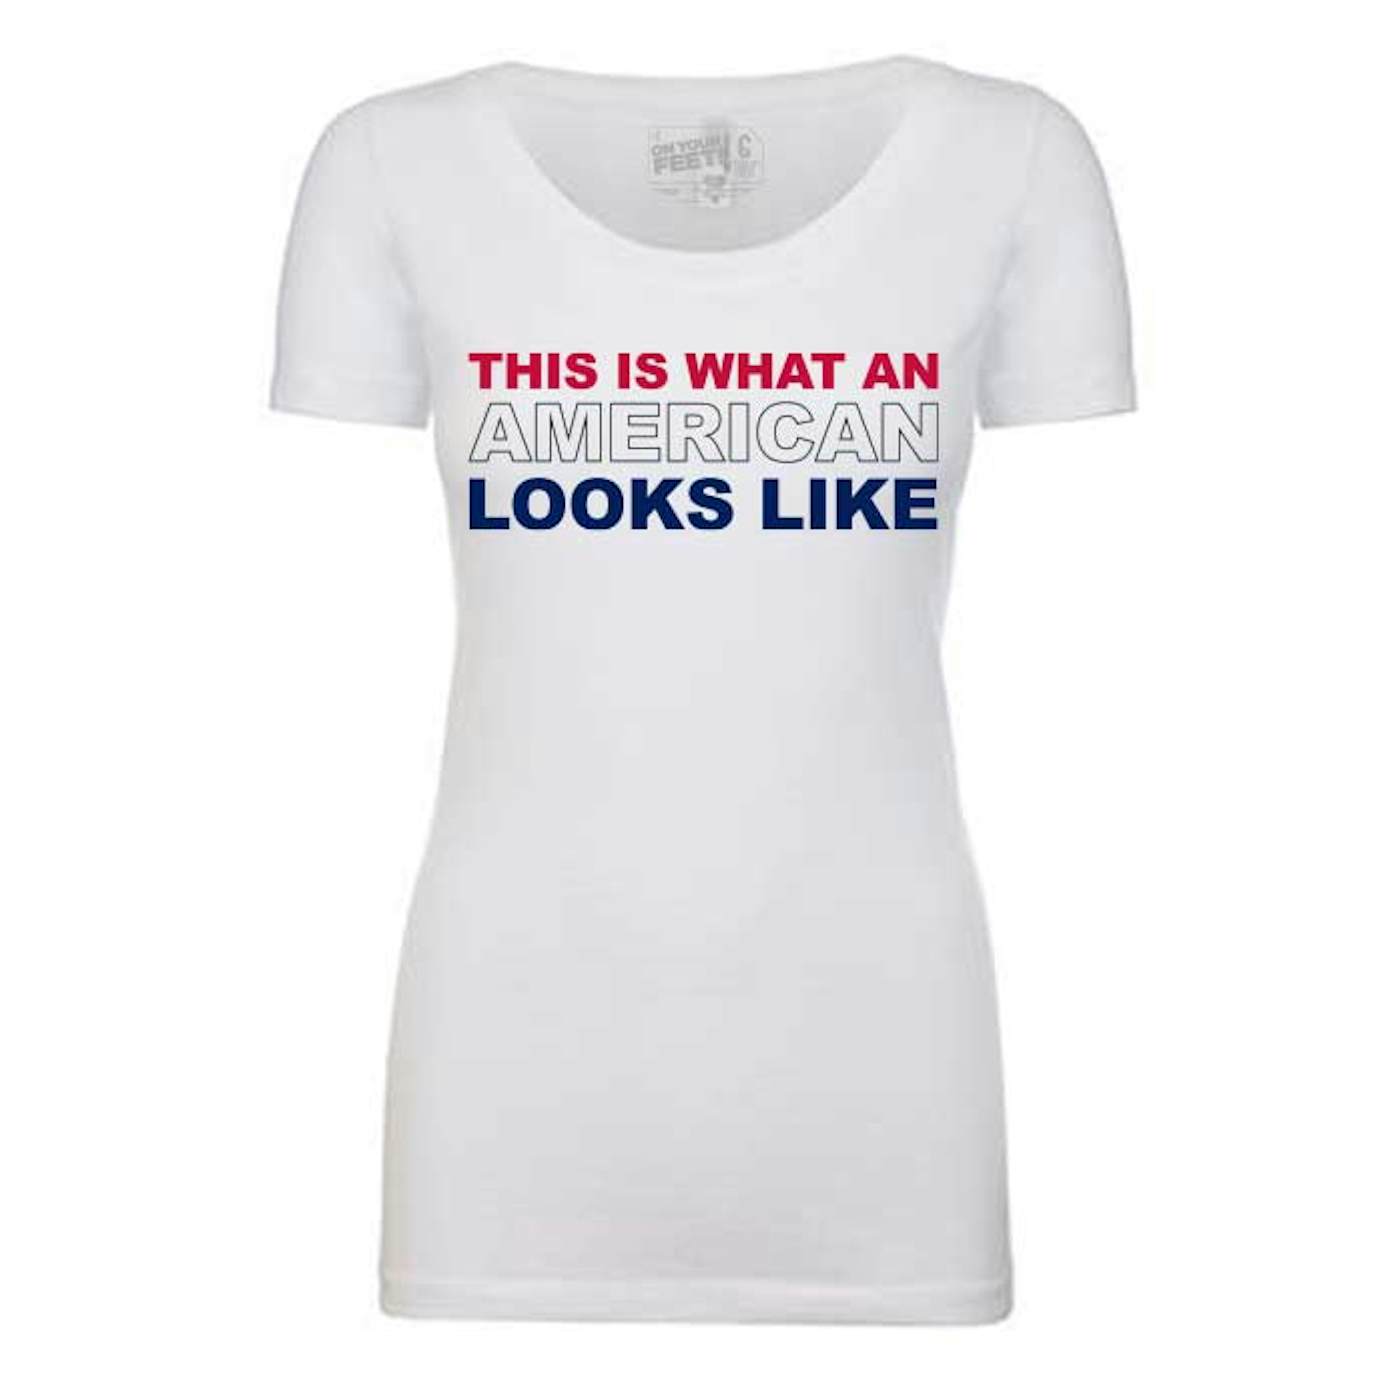 ON YOUR FEET: THE STORY OF EMILIO & GLORIA This Is What An American Looks Like Ladies Tee